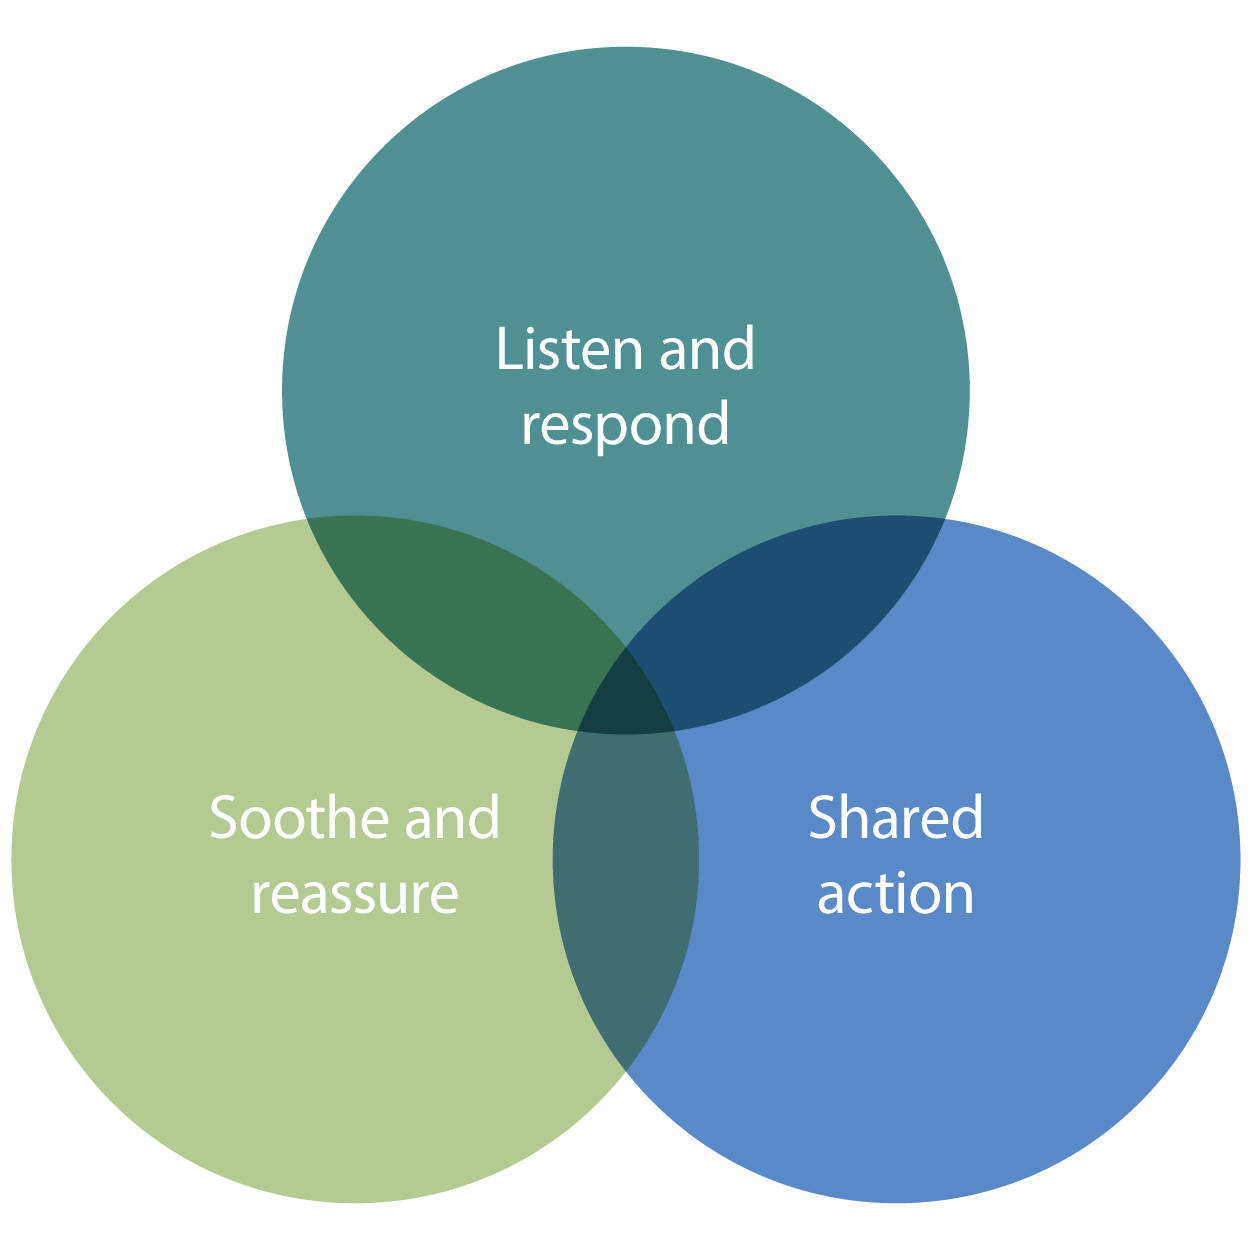 Listen and respond - soothe and reassure - shared action